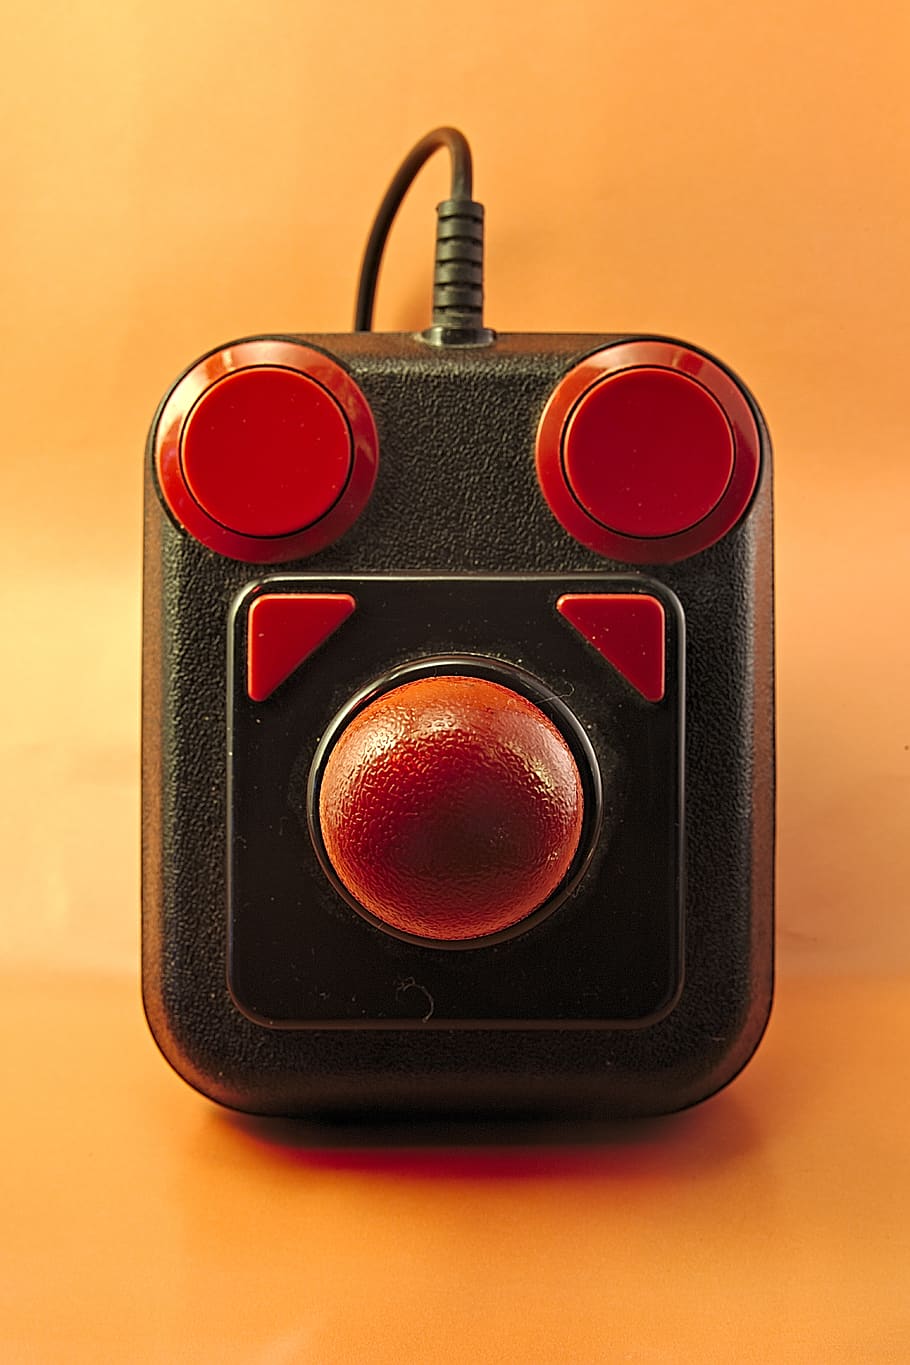 competition pro, retro, 80's, computer, joystick, abstract, red, single object, studio shot, close-up